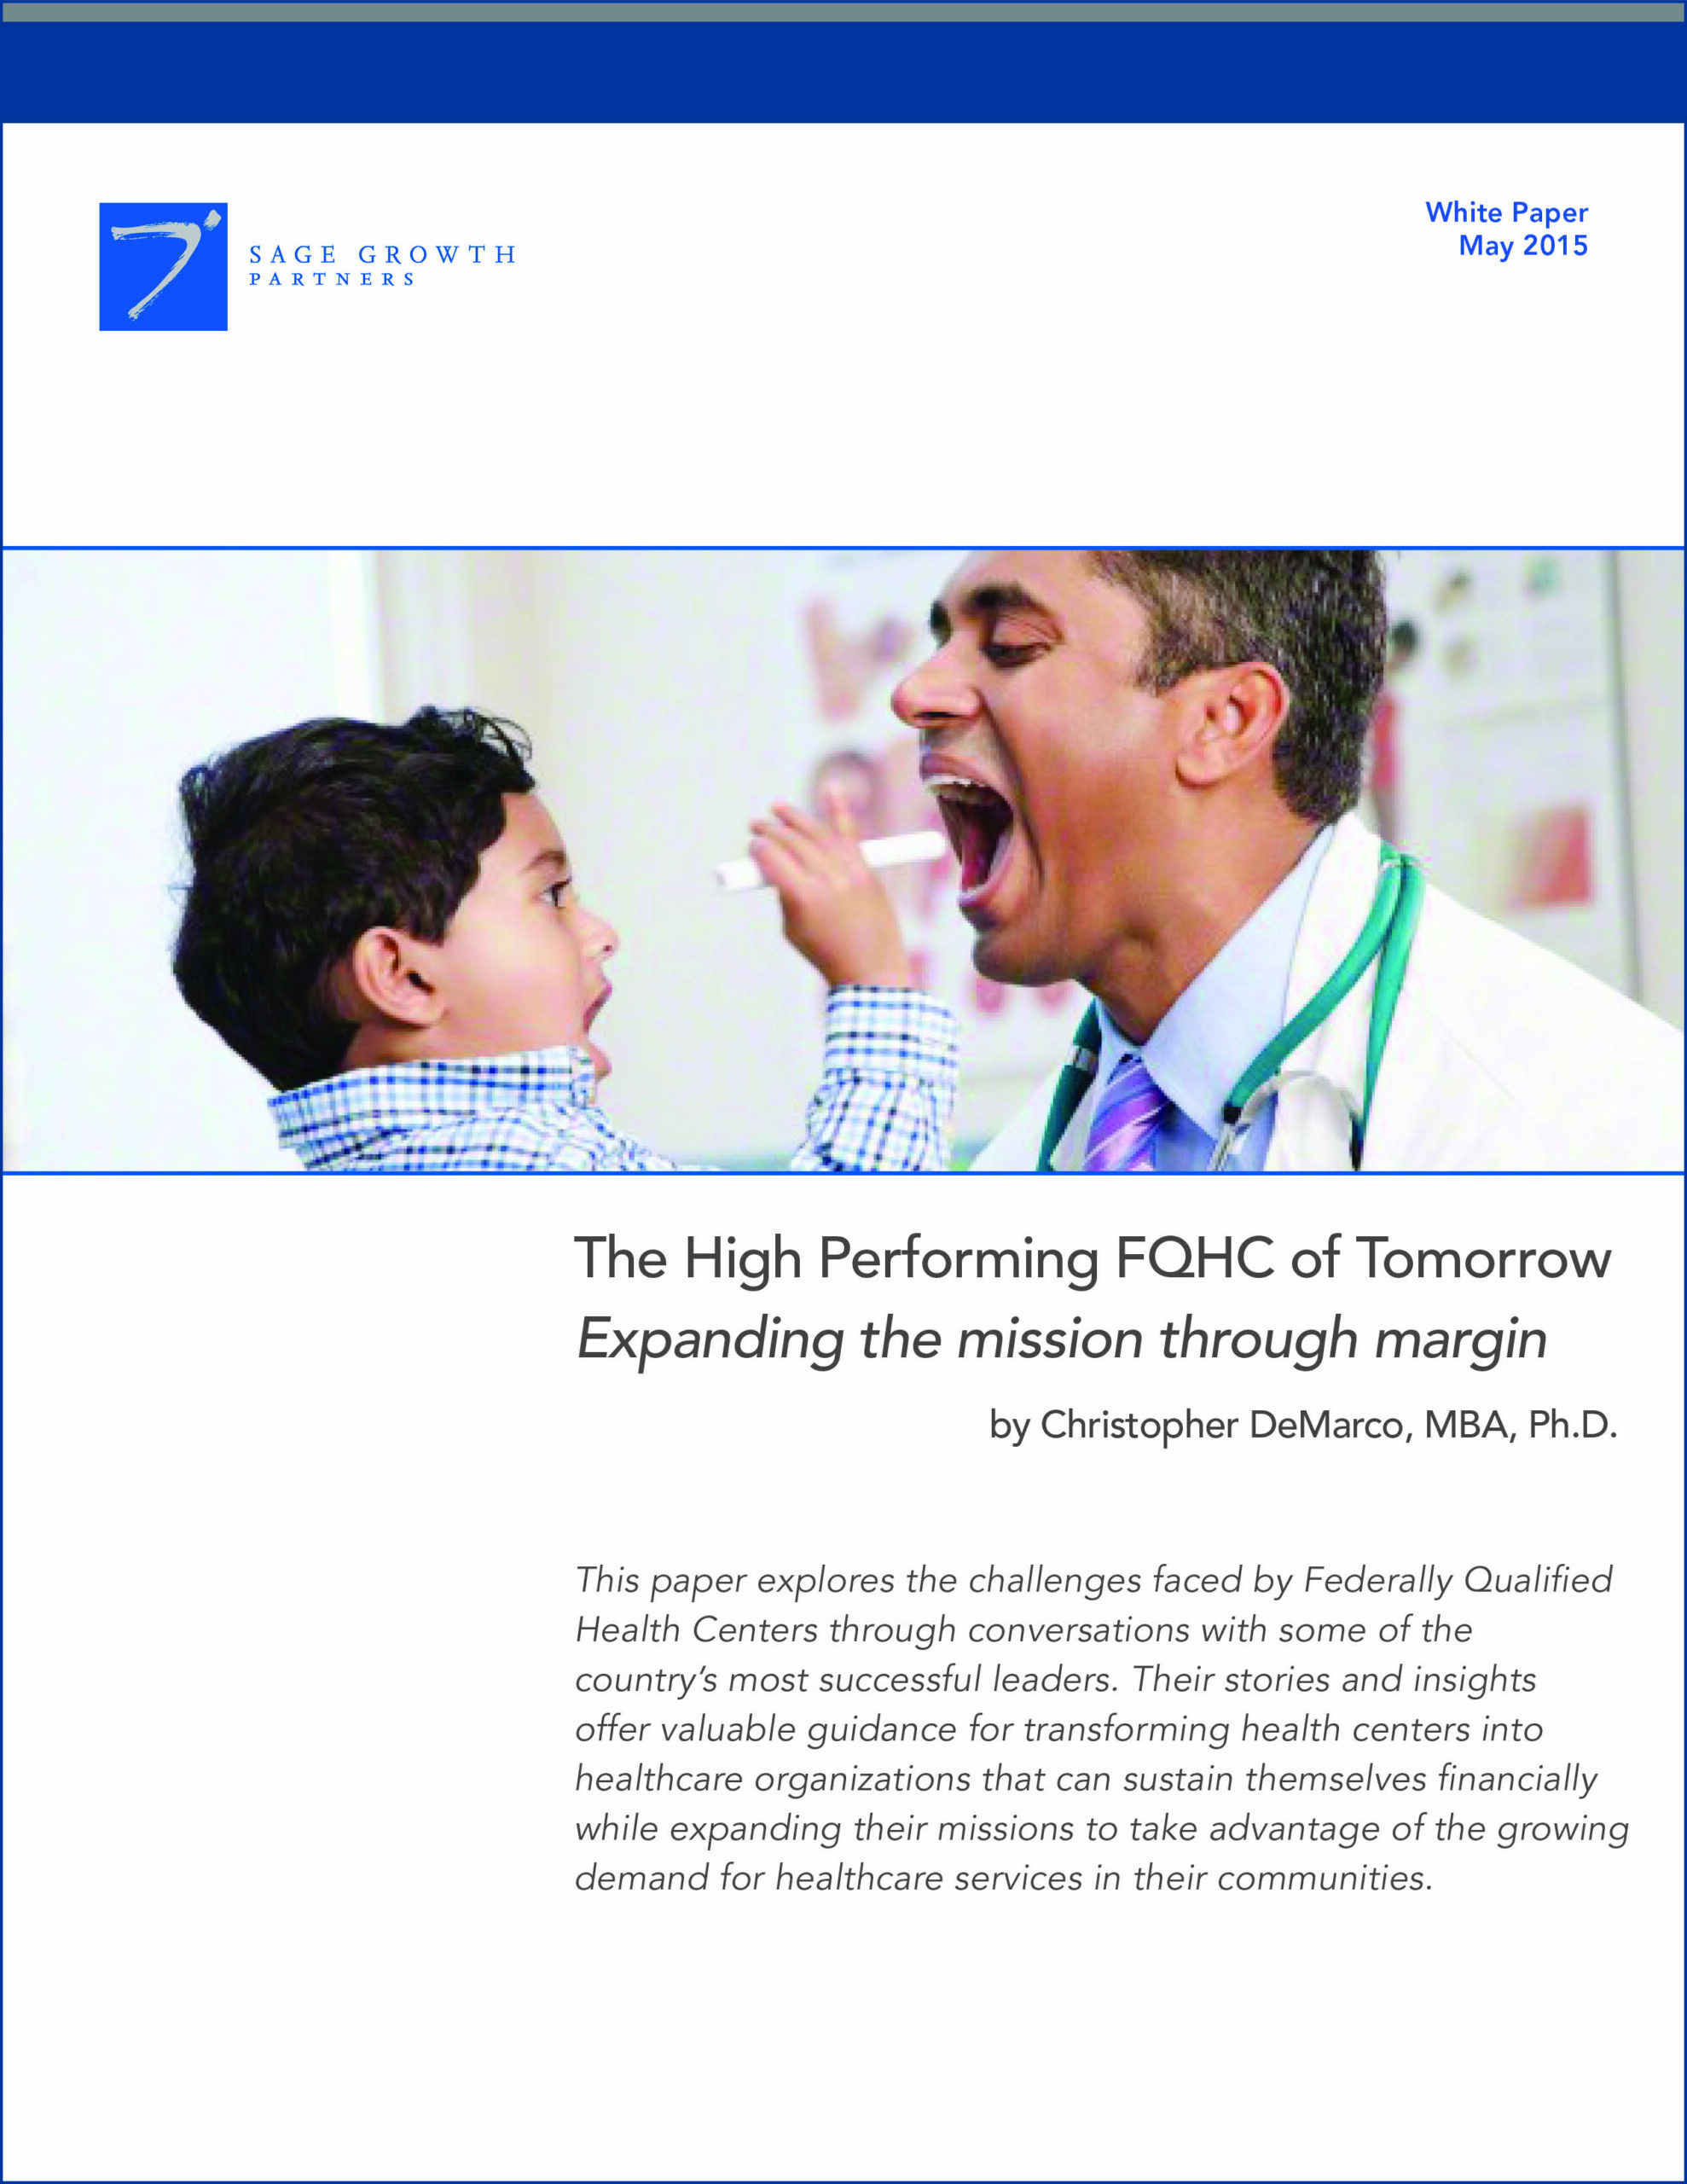 The High Performing FQHC of Tomorrow